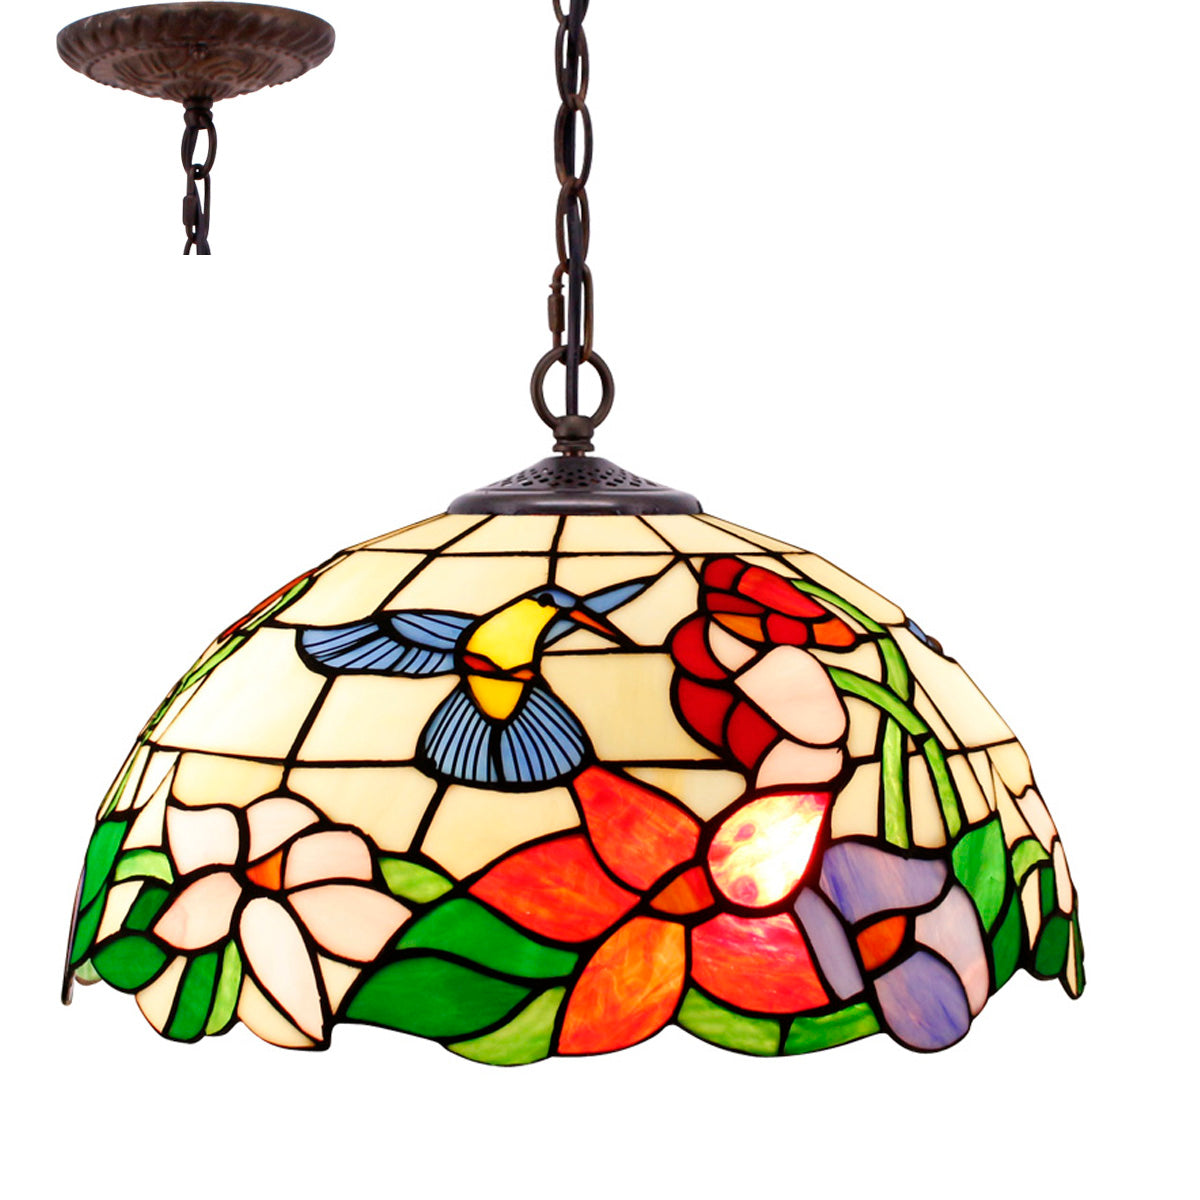 Tiffany Lamp Shade Replacement Werfactory® W16H7 Inch